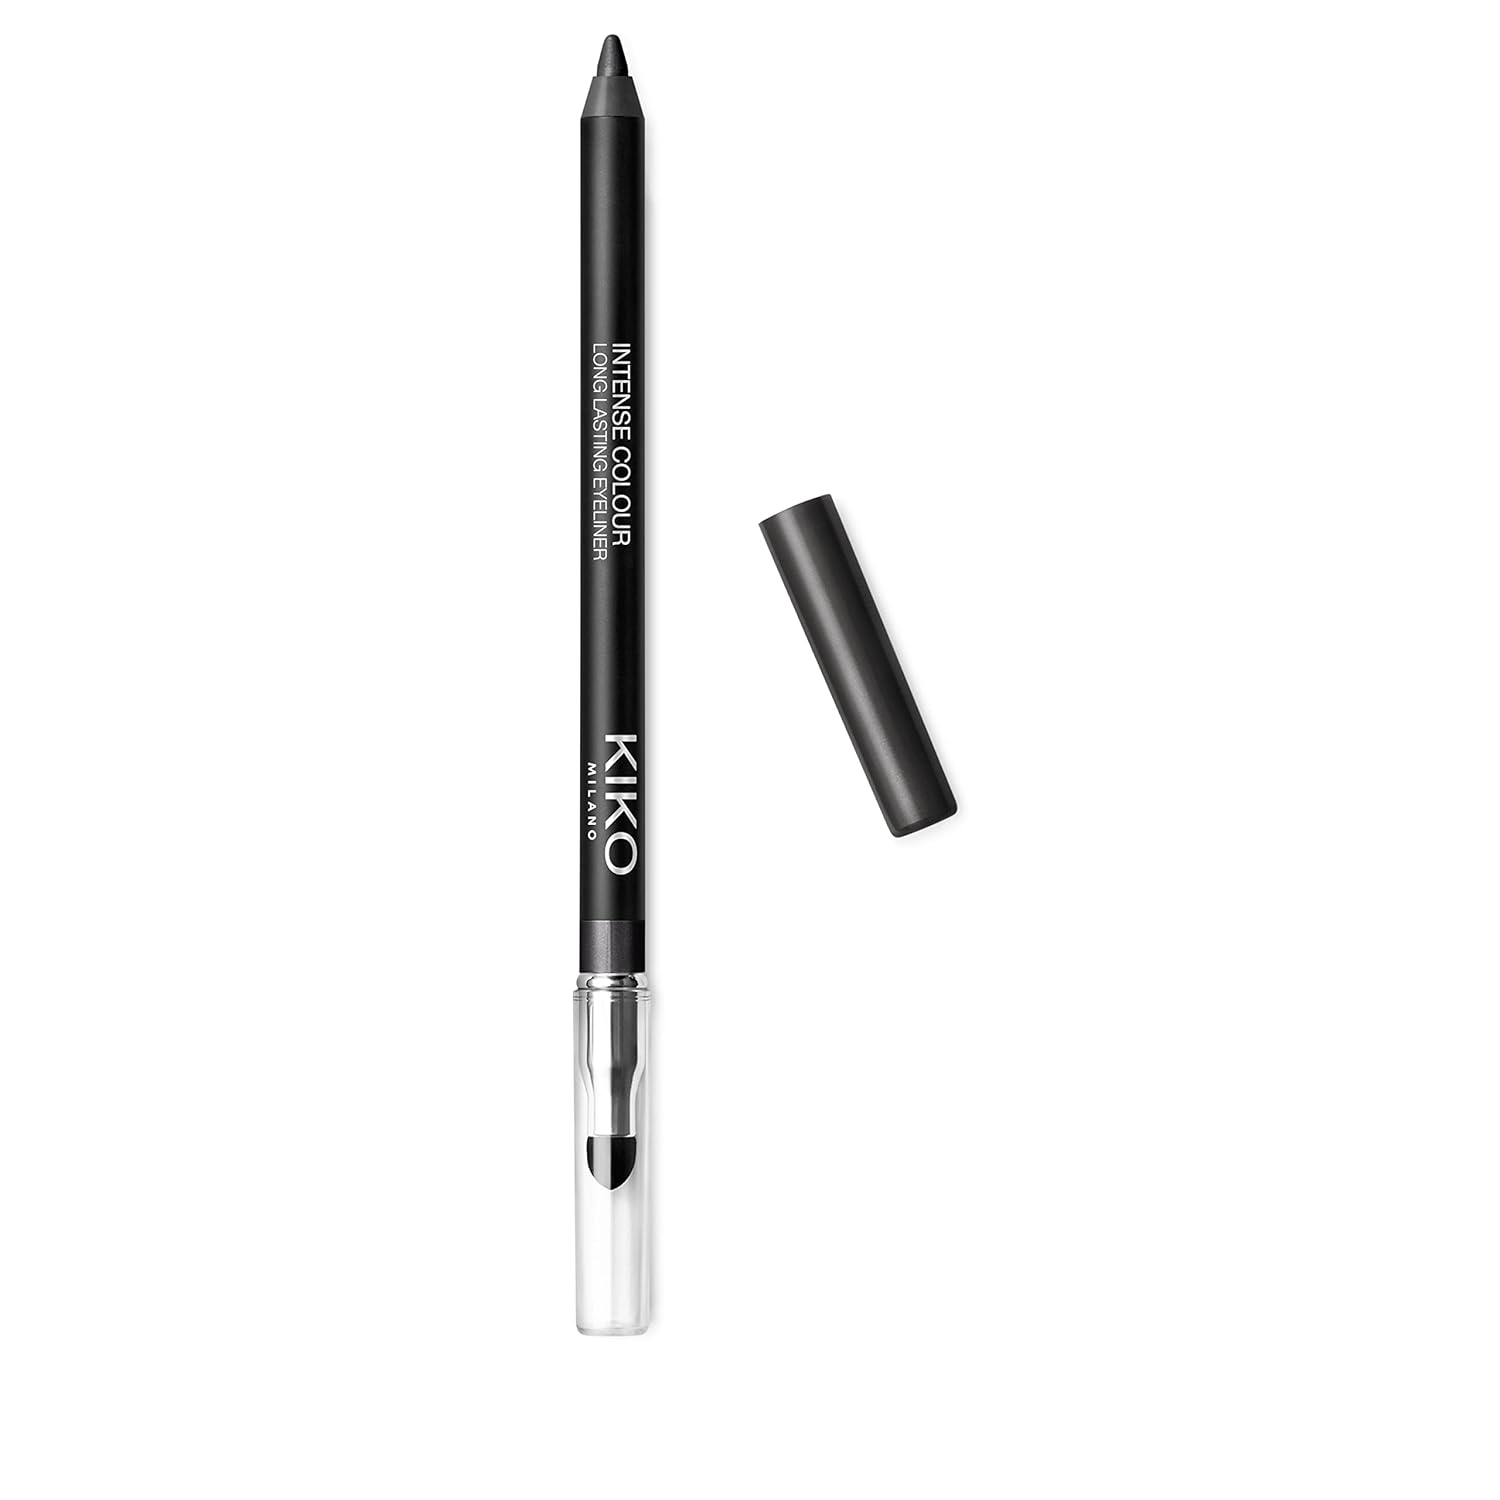 Kiko Milano Intense Colour Long Lasting Eyeliner 21 | Intense And Smooth-gliding Outer Eye Pencil With Long Wear